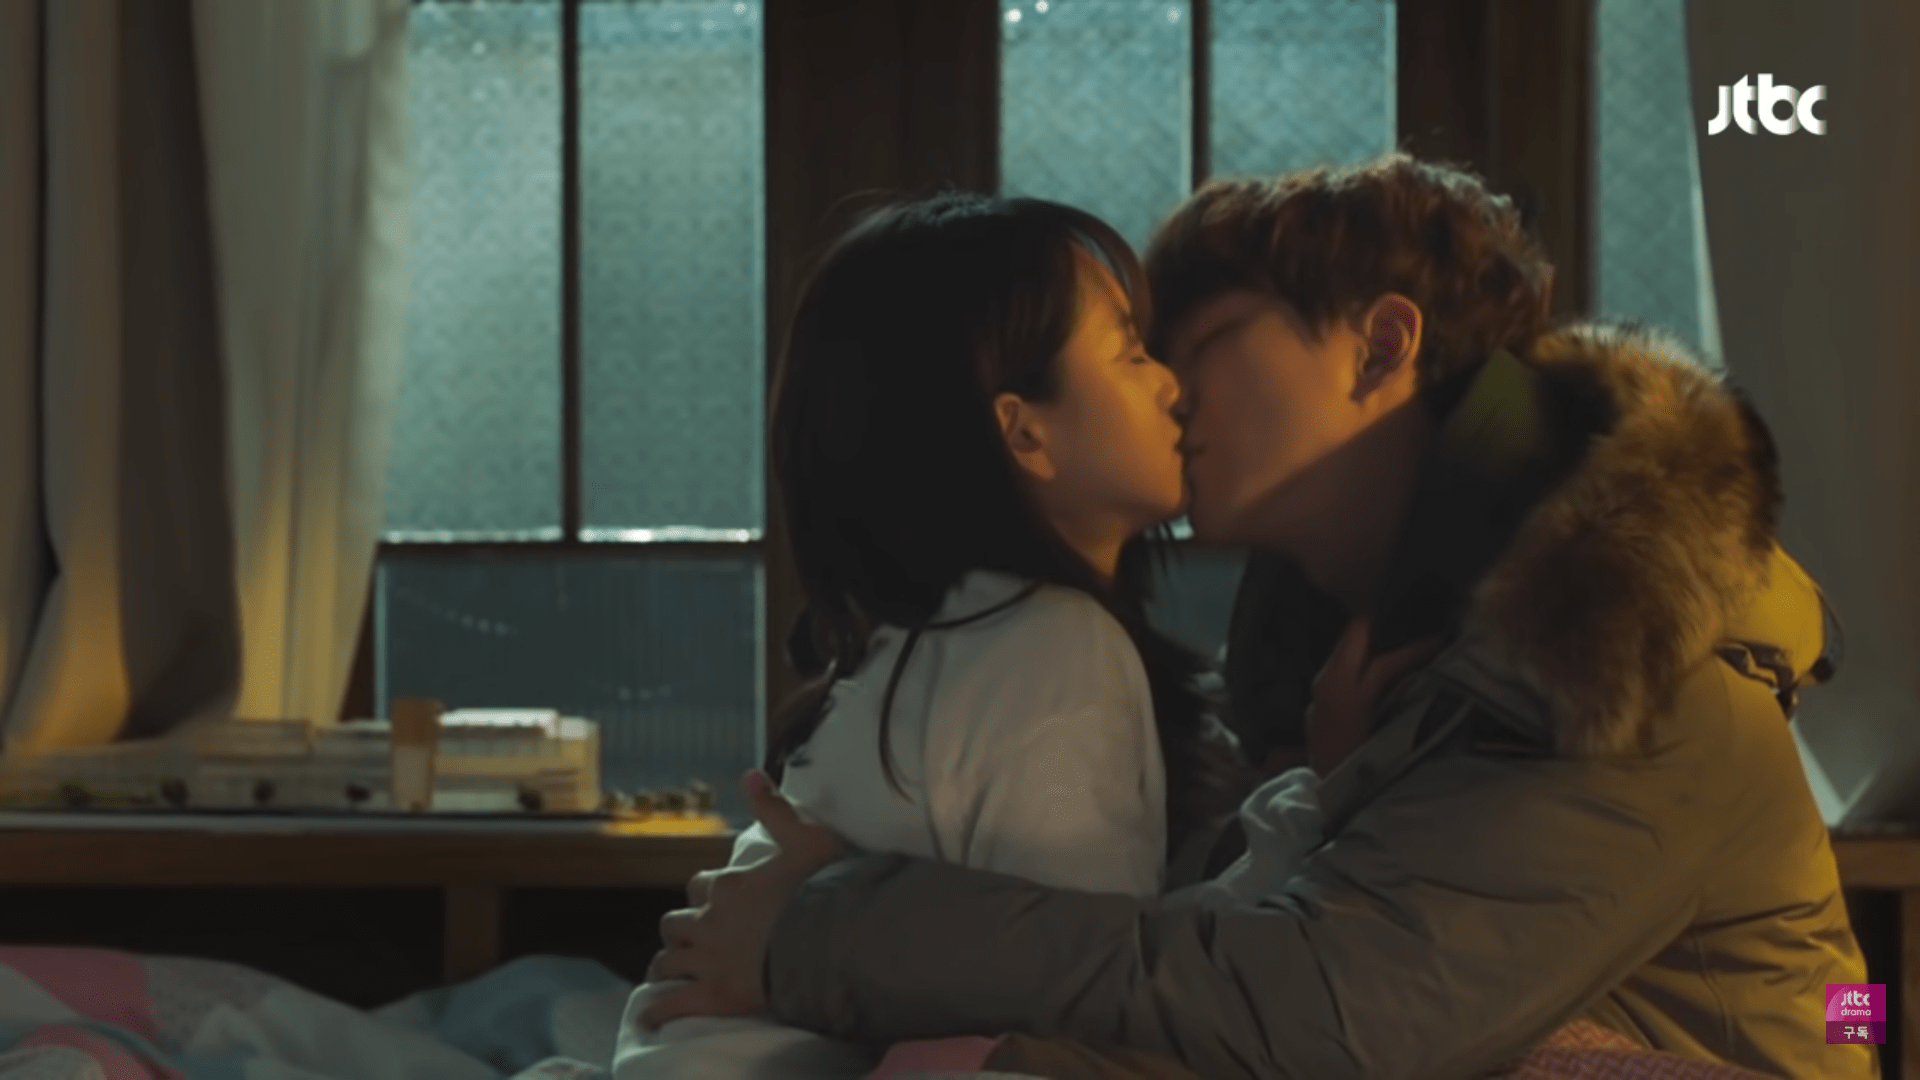 Passionate K-Drama Kiss Scenes You May Want To Avoid Watching With Your  Parents